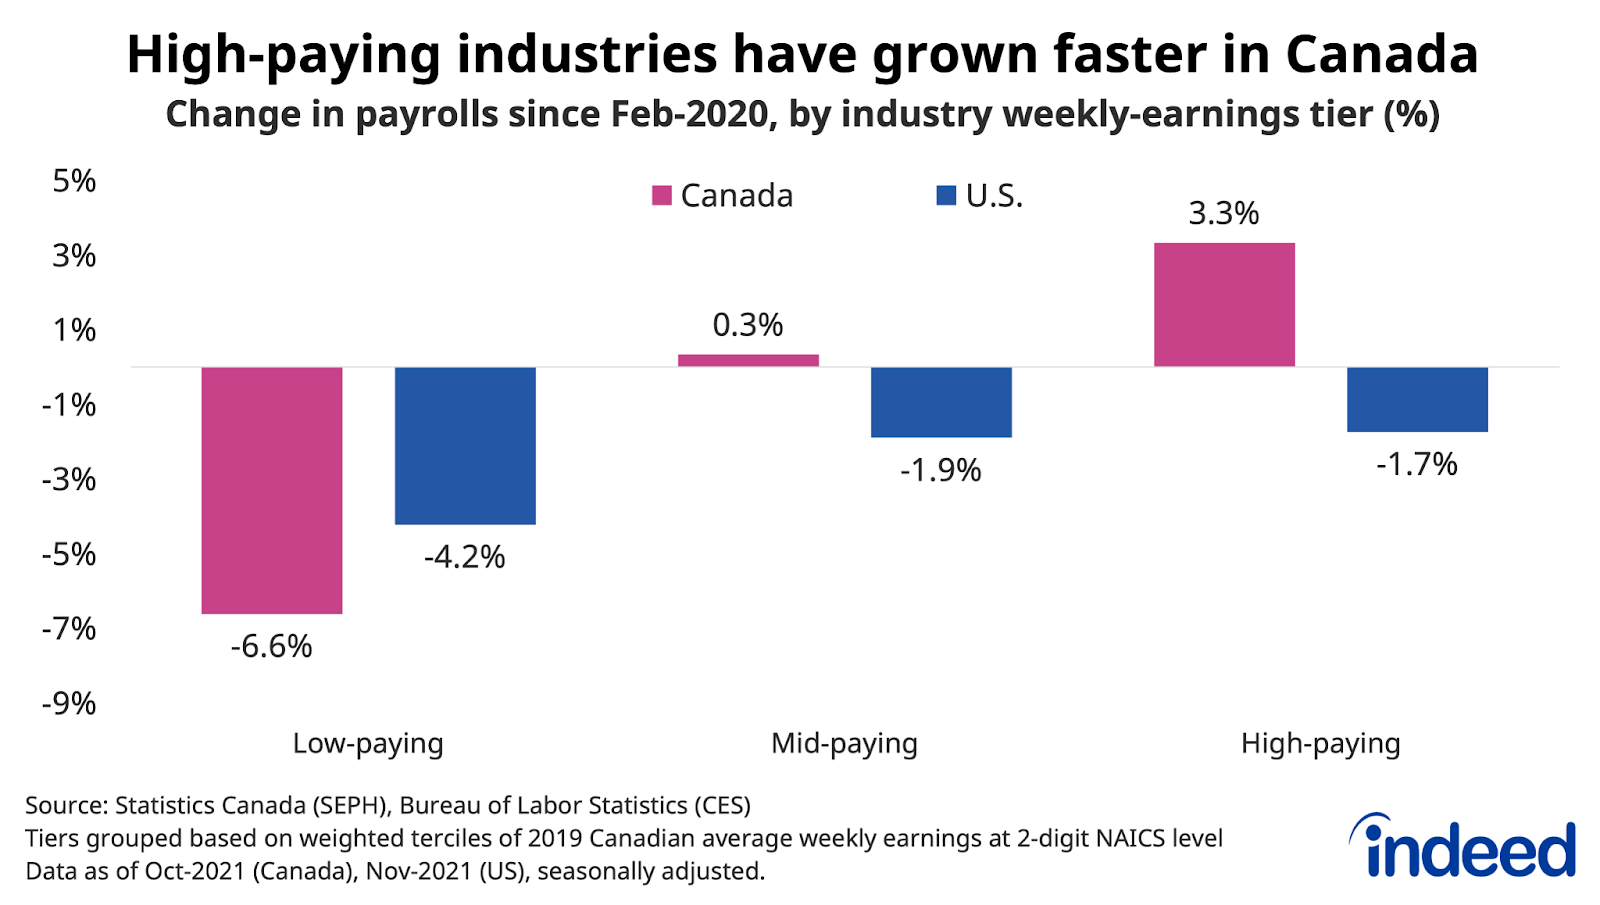 Bar chart titled “High-paying industries have grown faster in Canada.” 